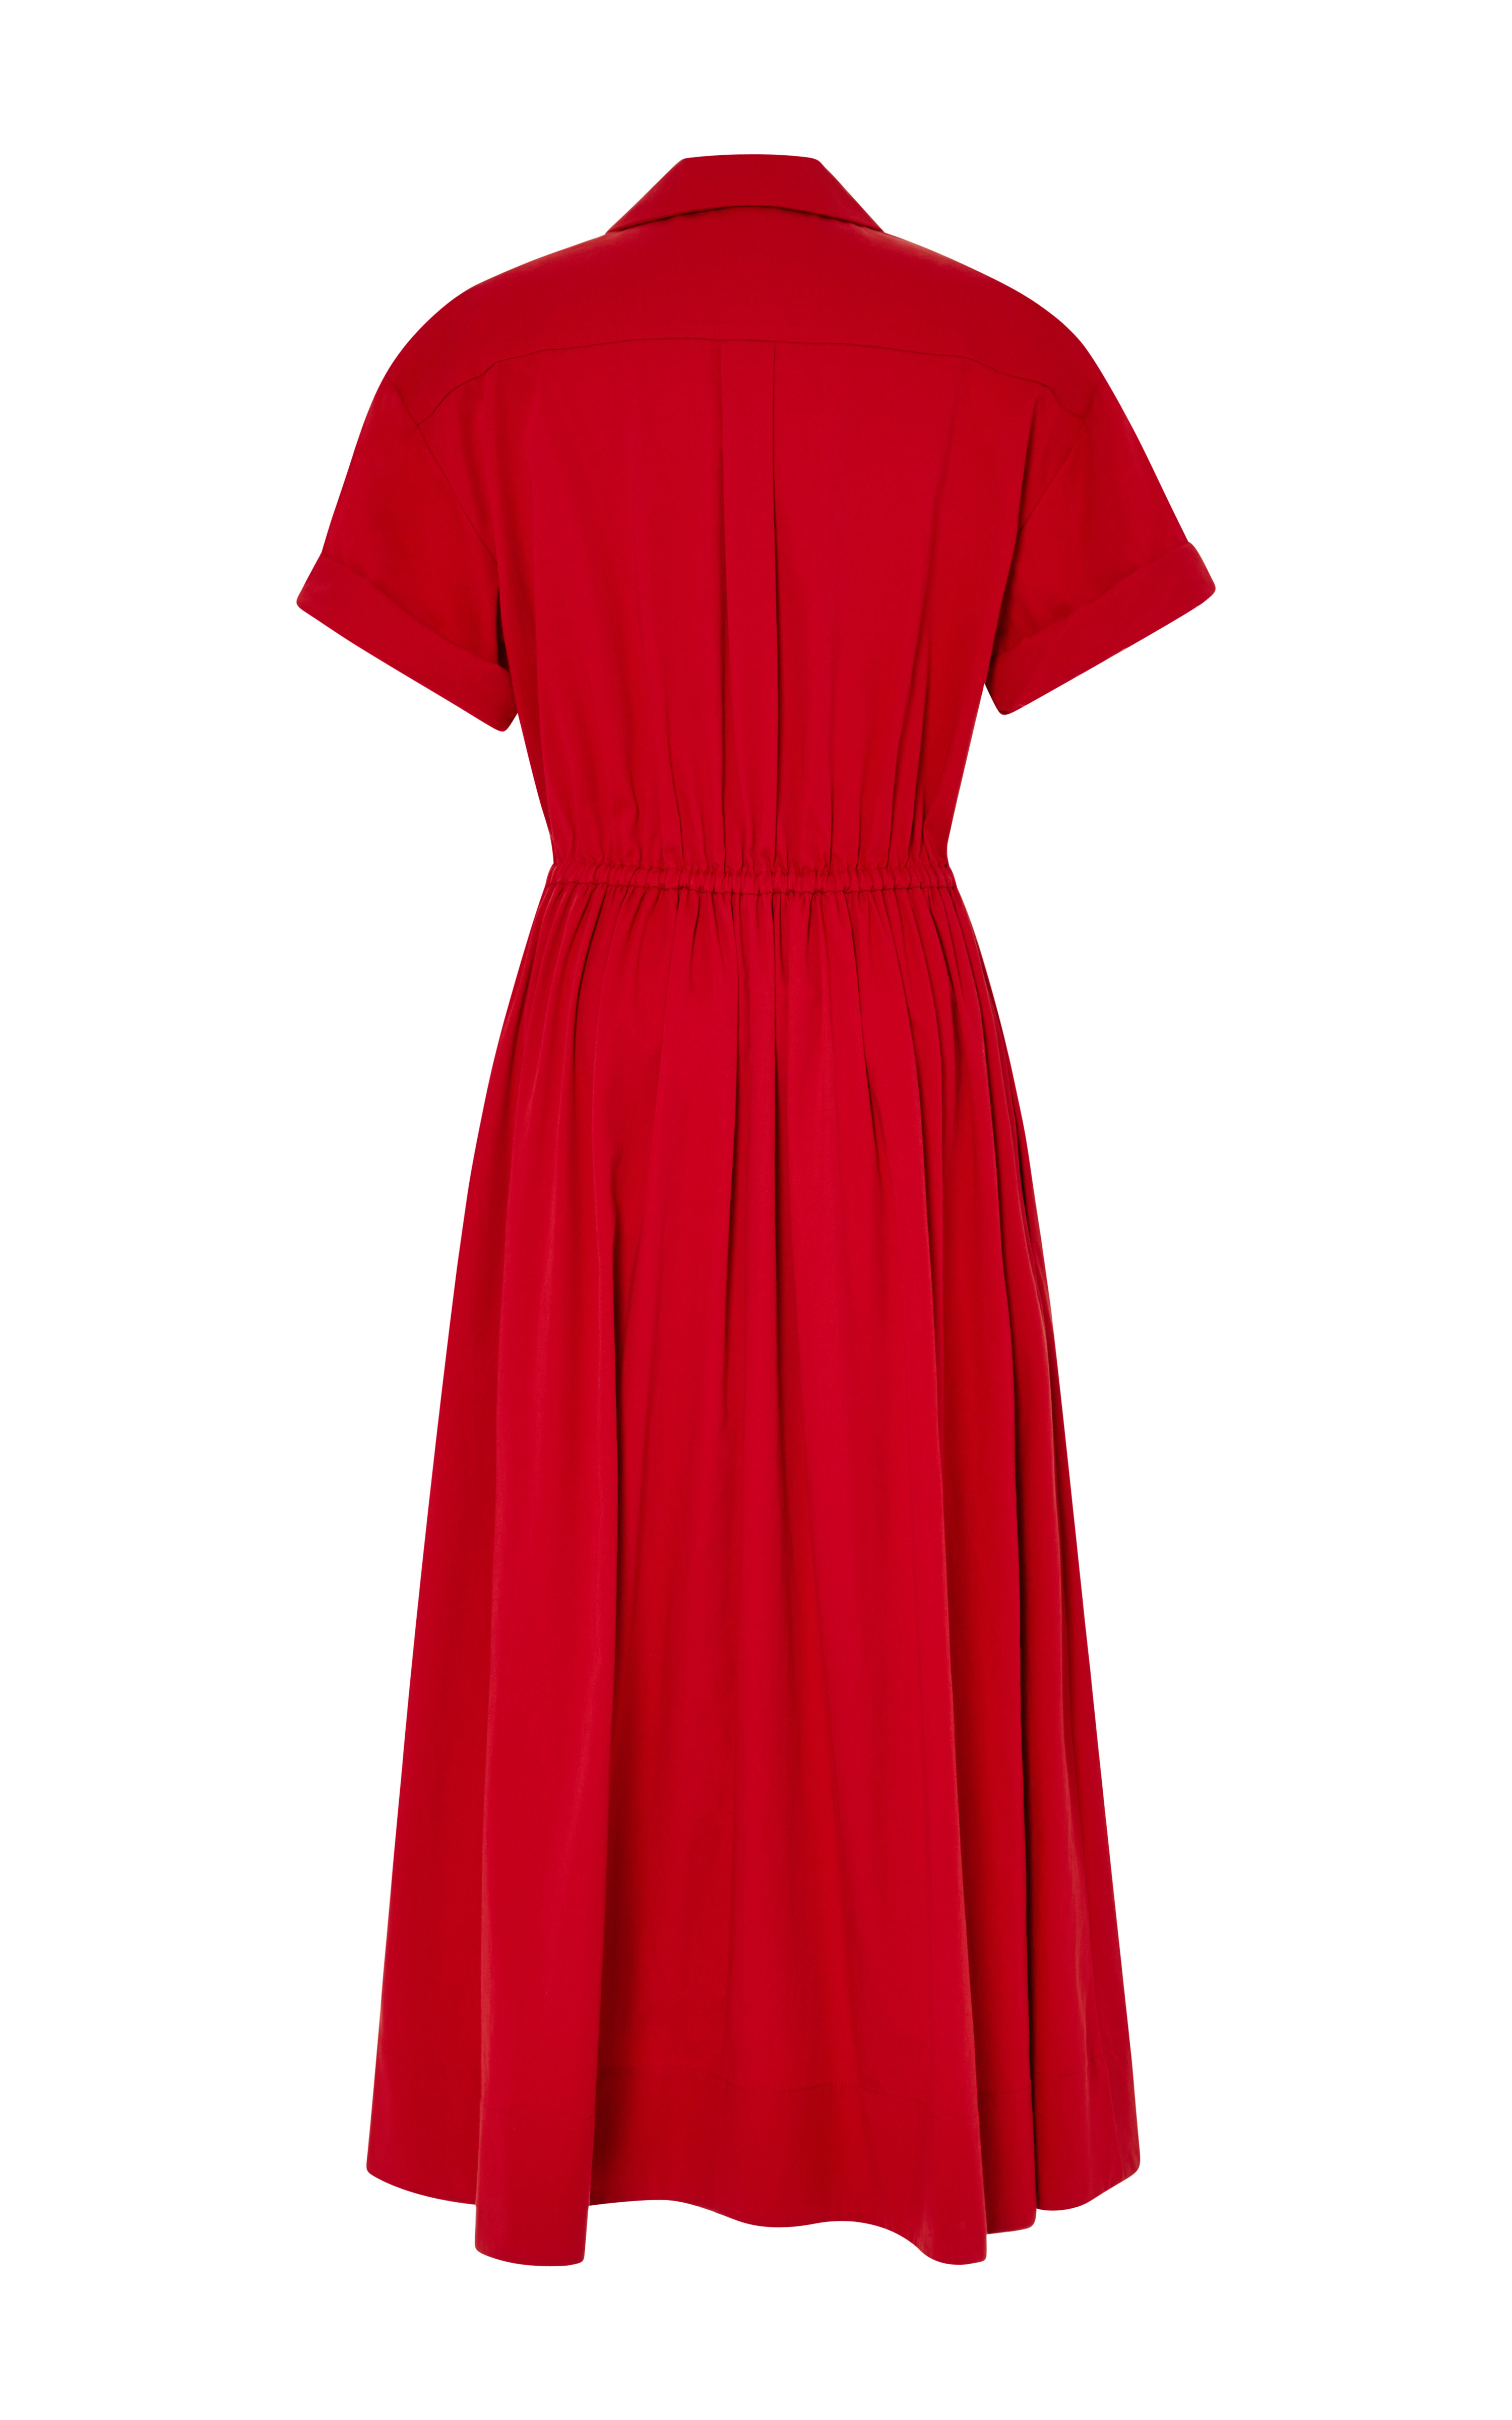 Lyst - Rosie Assoulin Red Cotton Twill Belted Jane Shirt Dress in Red